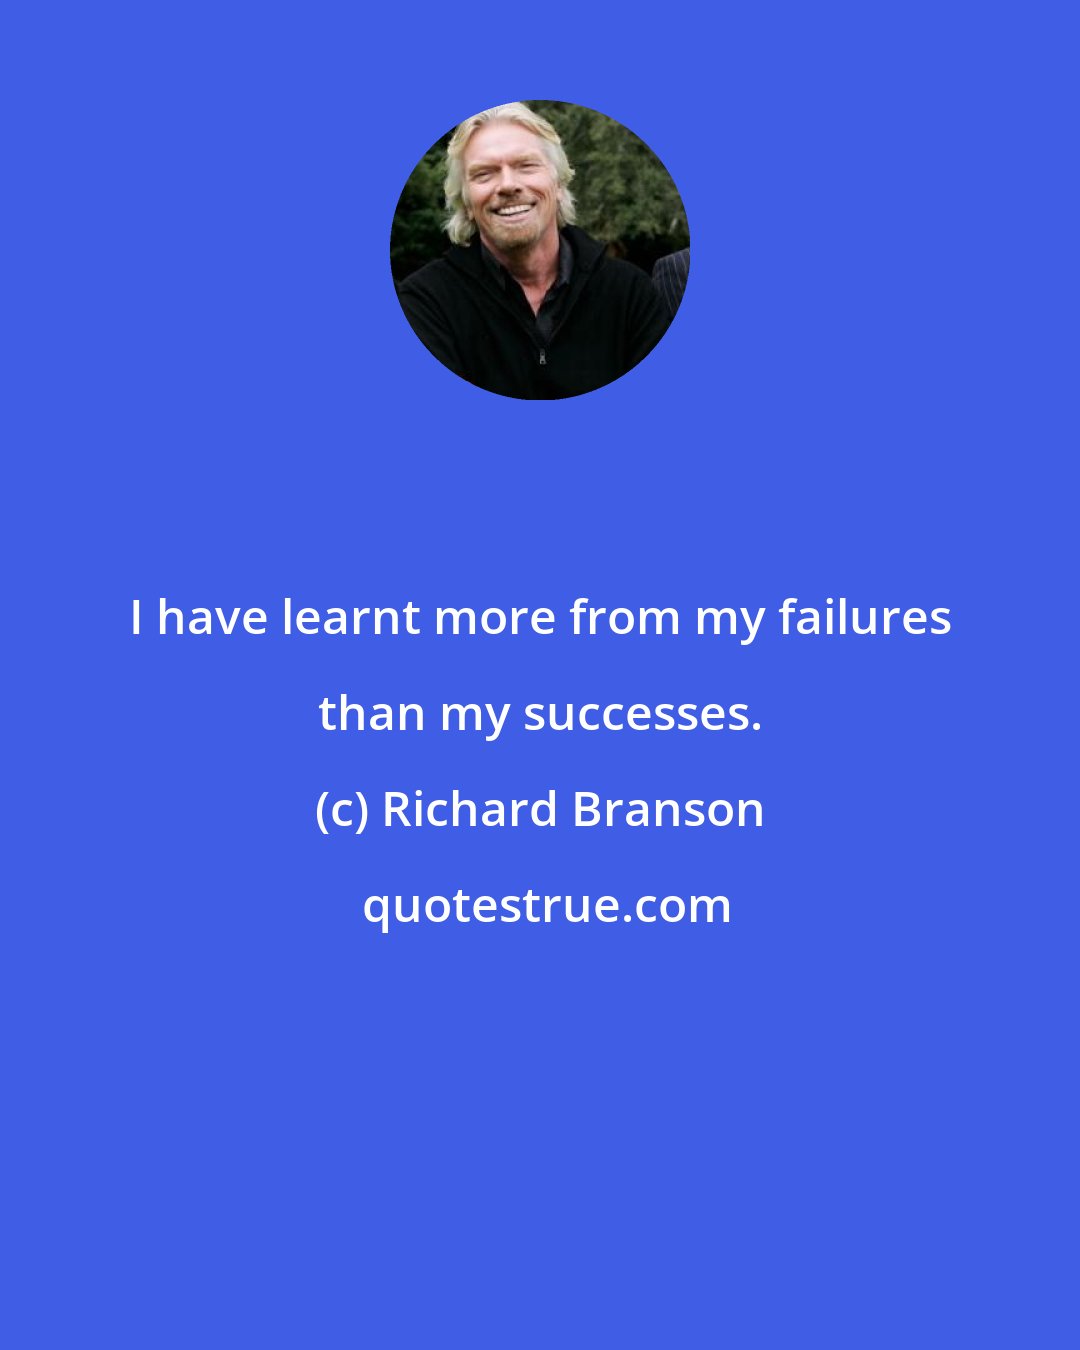 Richard Branson: I have learnt more from my failures than my successes.